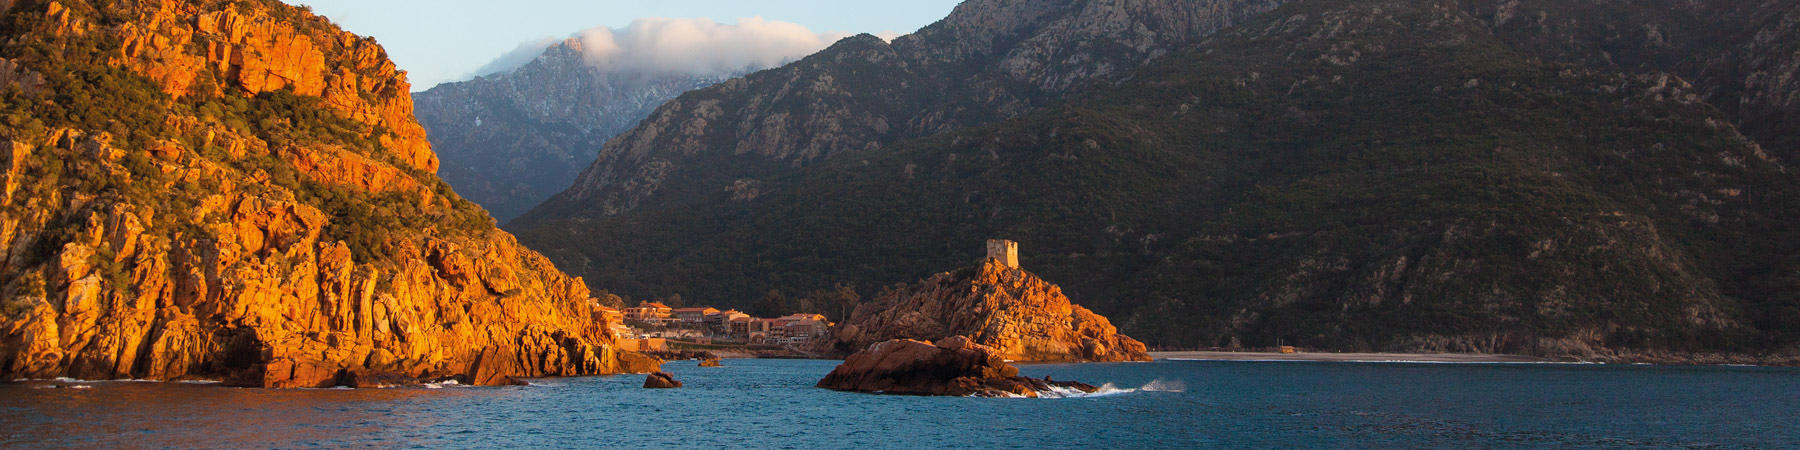 From Ajaccio to the Revellata Cape - Photo Pêcheur d'Images